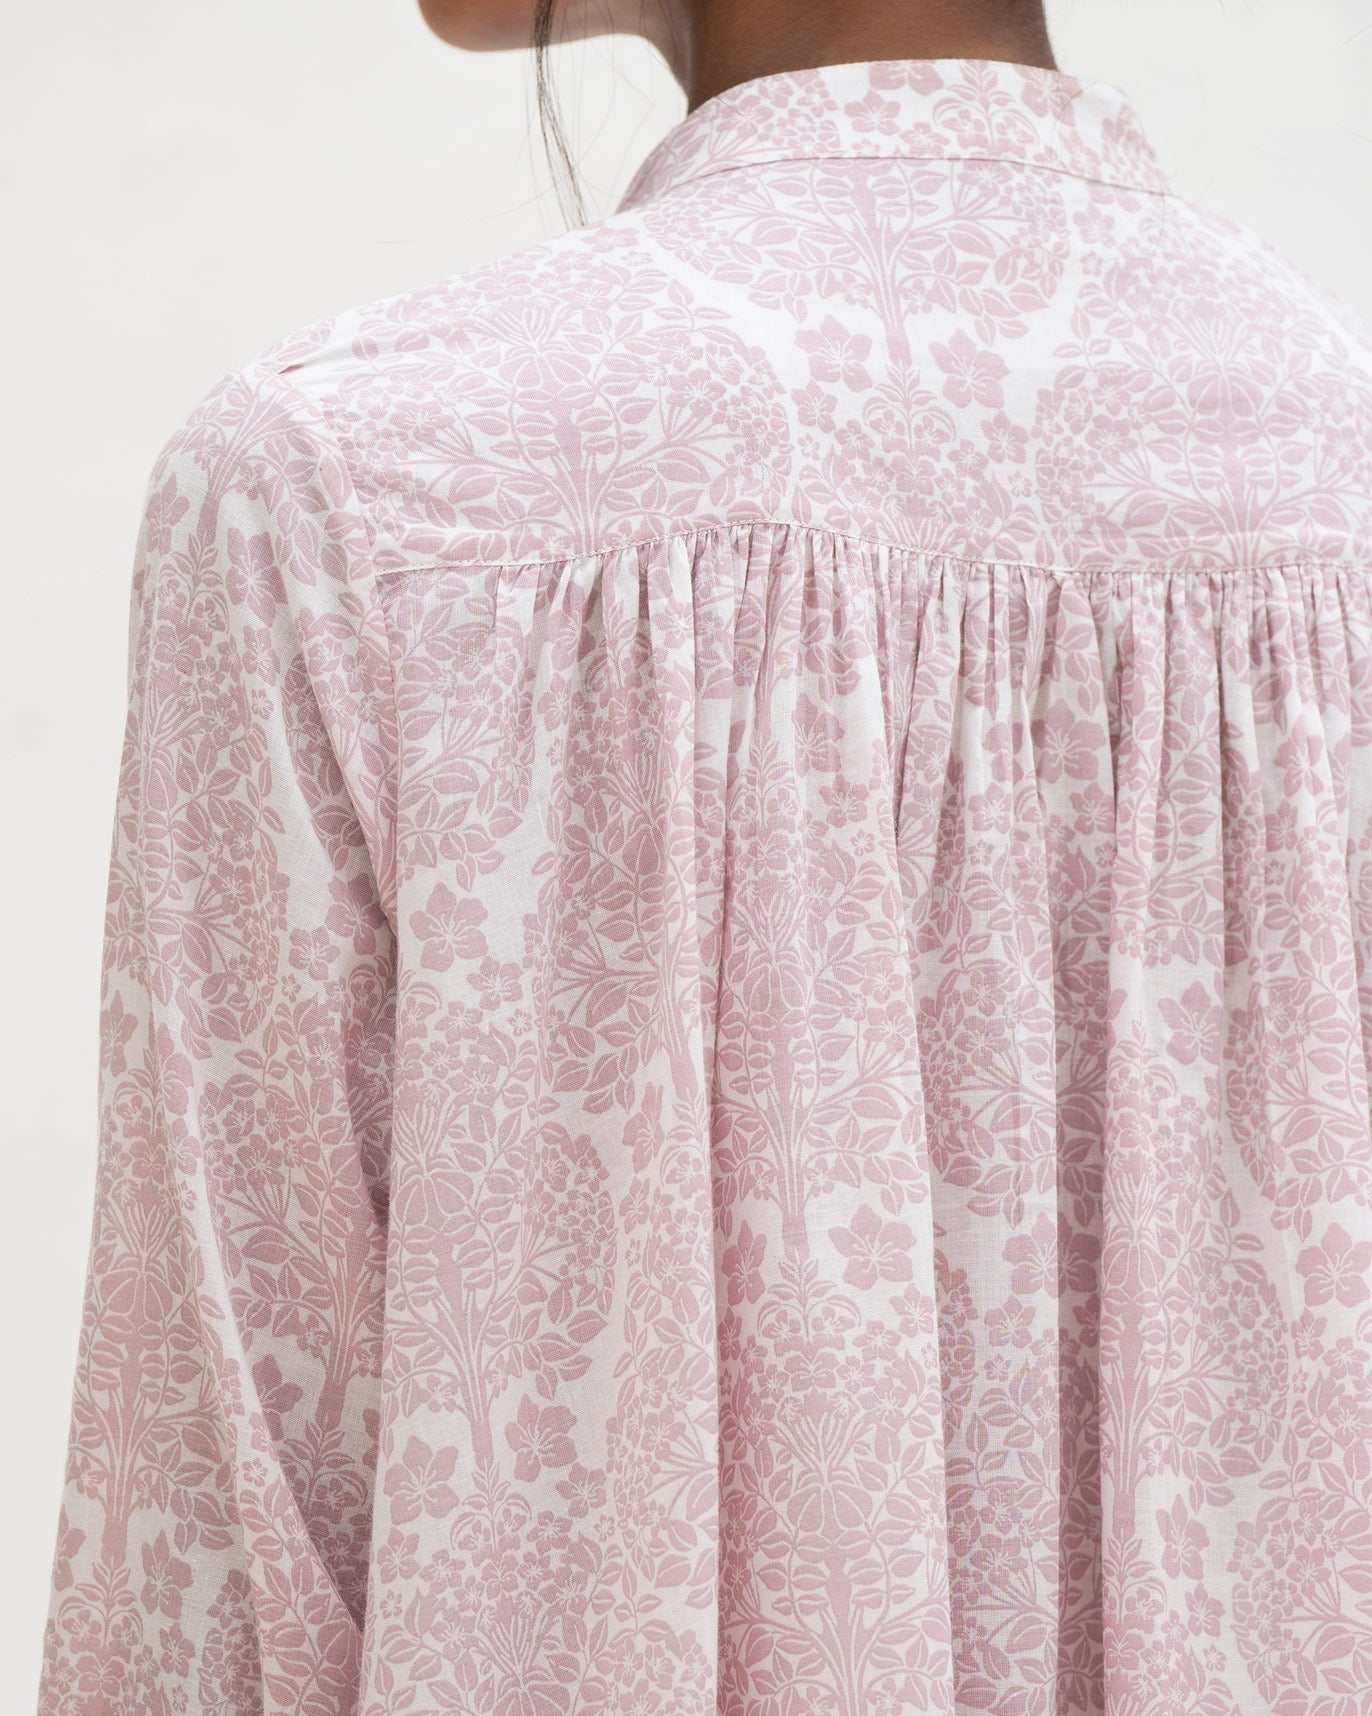 Back Gathered Top - Pink & Ivory